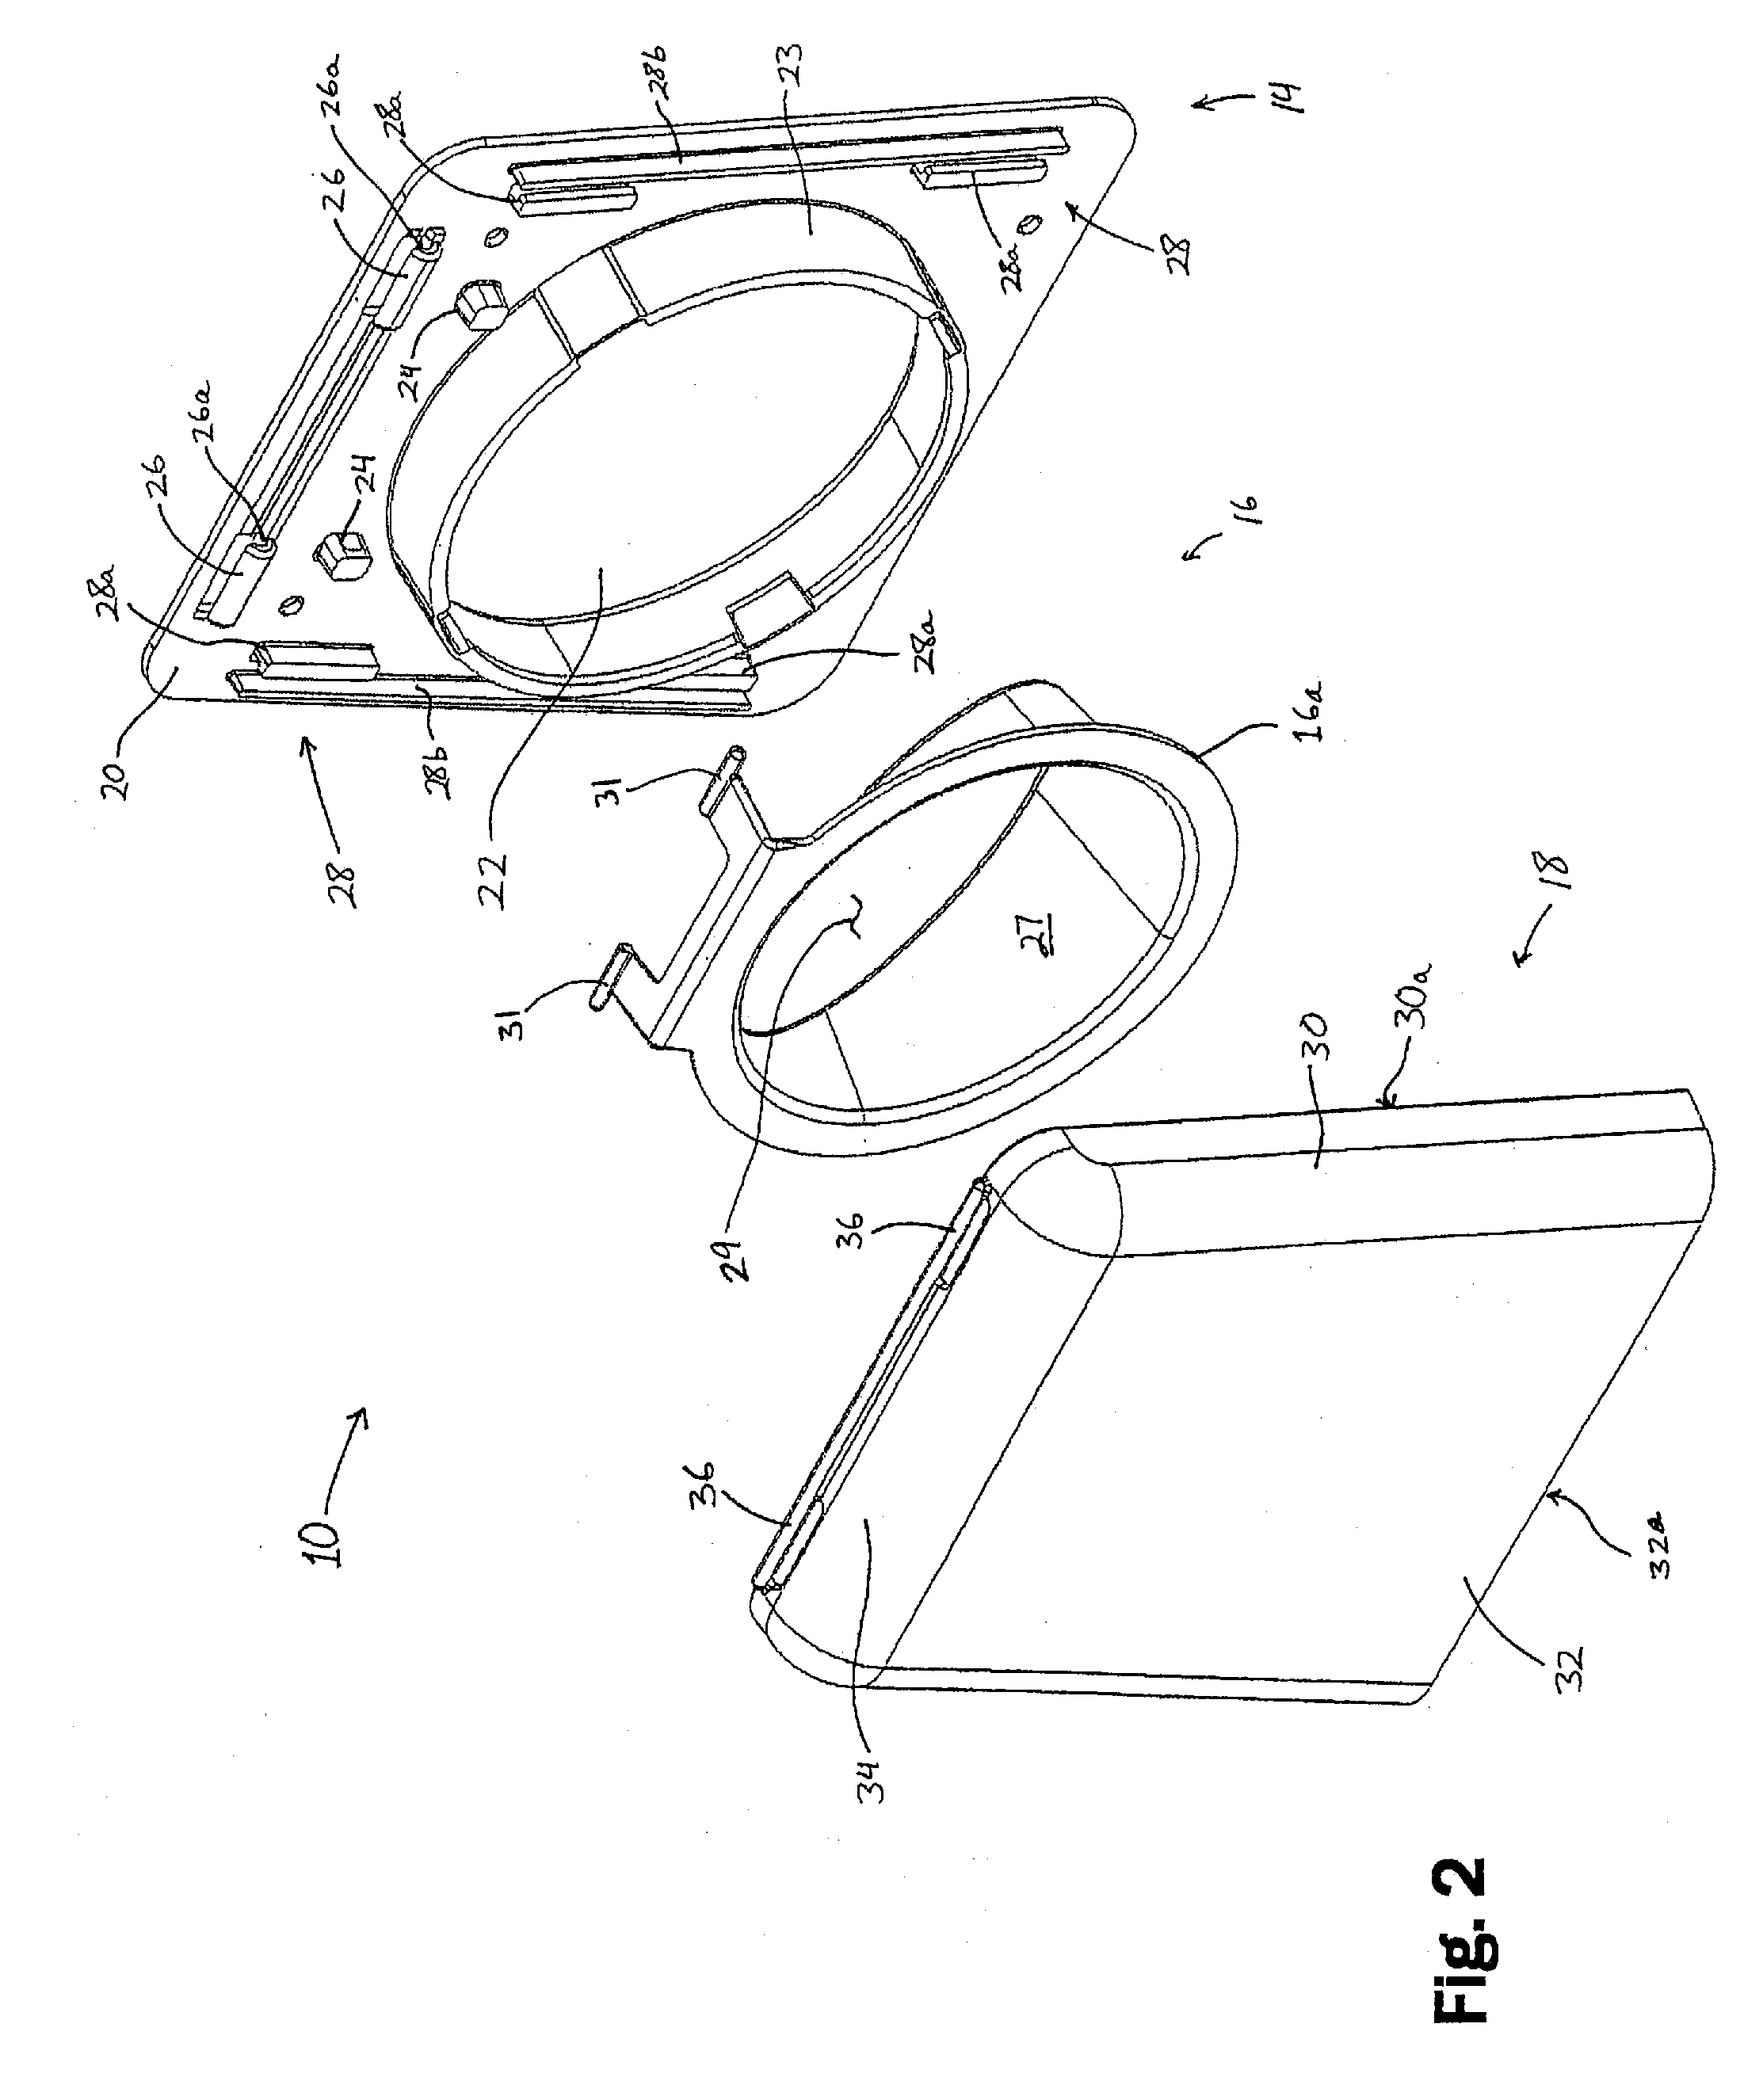 Low profile animal restricting vent for fluid discharge conduits